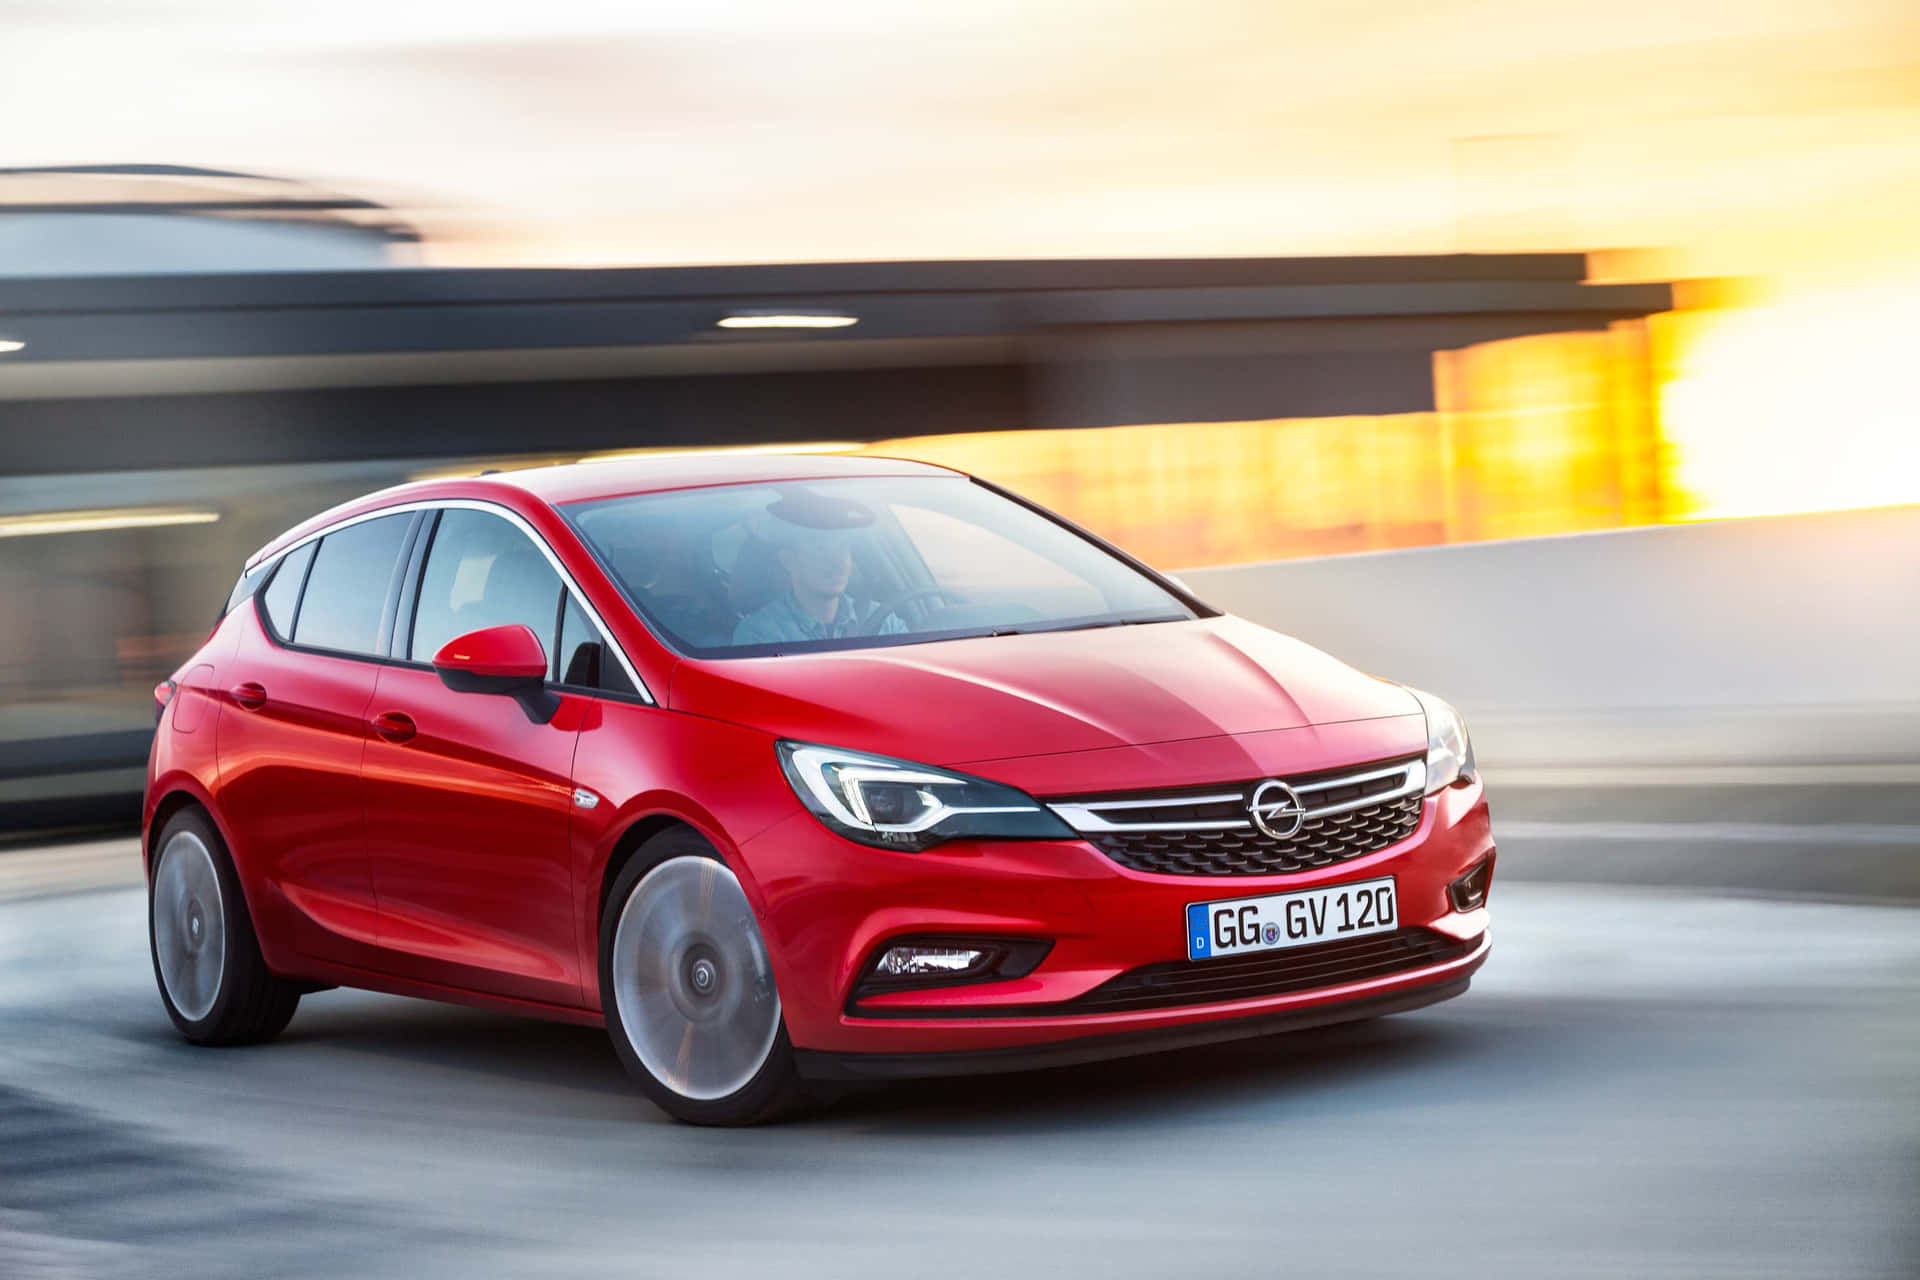 Caption: Opel Astra Elegance on the Open Road Wallpaper